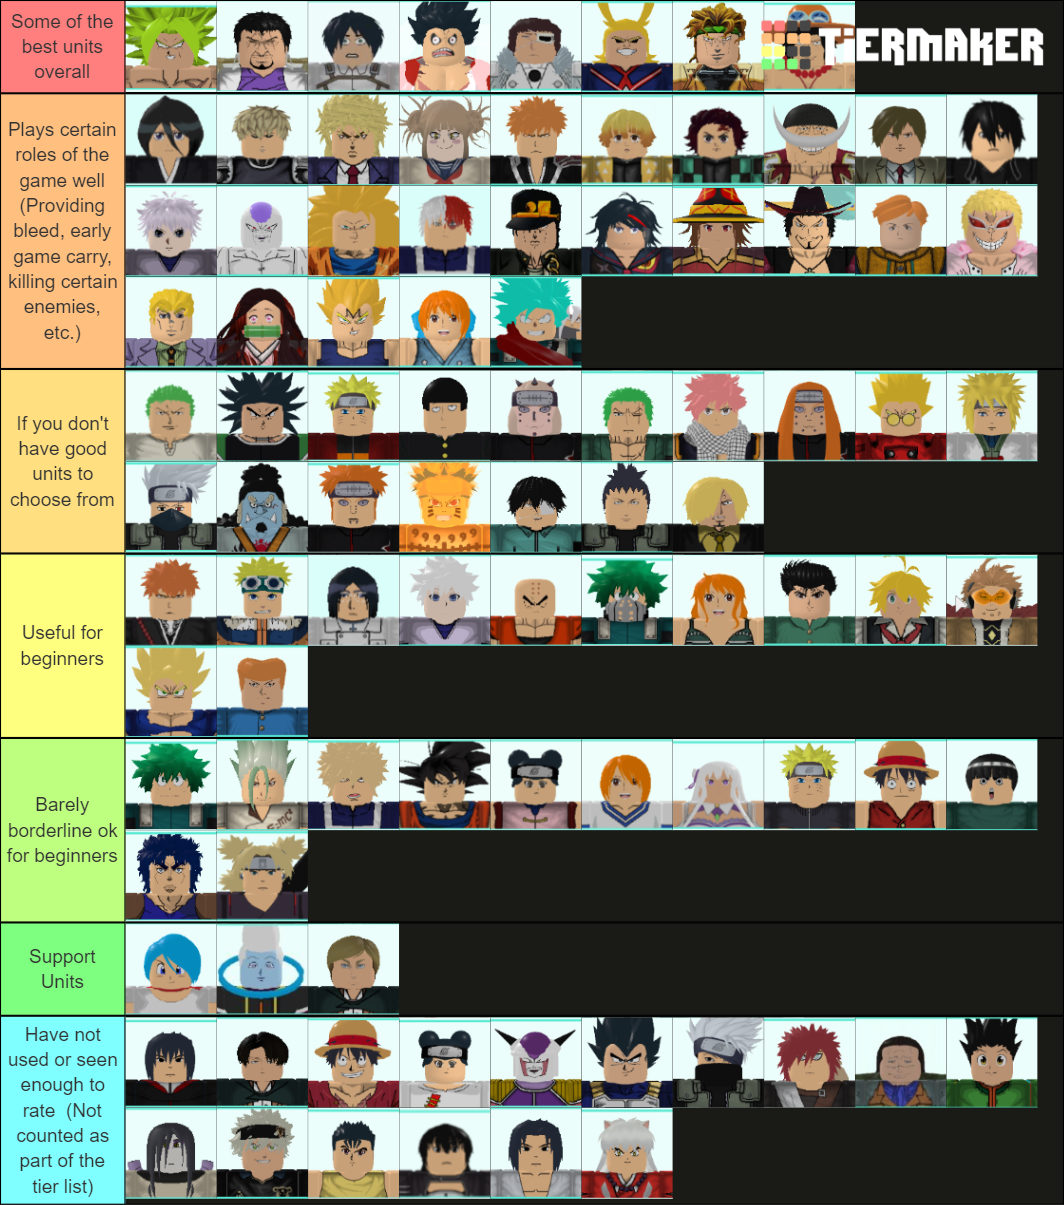 My tier list of all the defenses. I'm also taking into account the